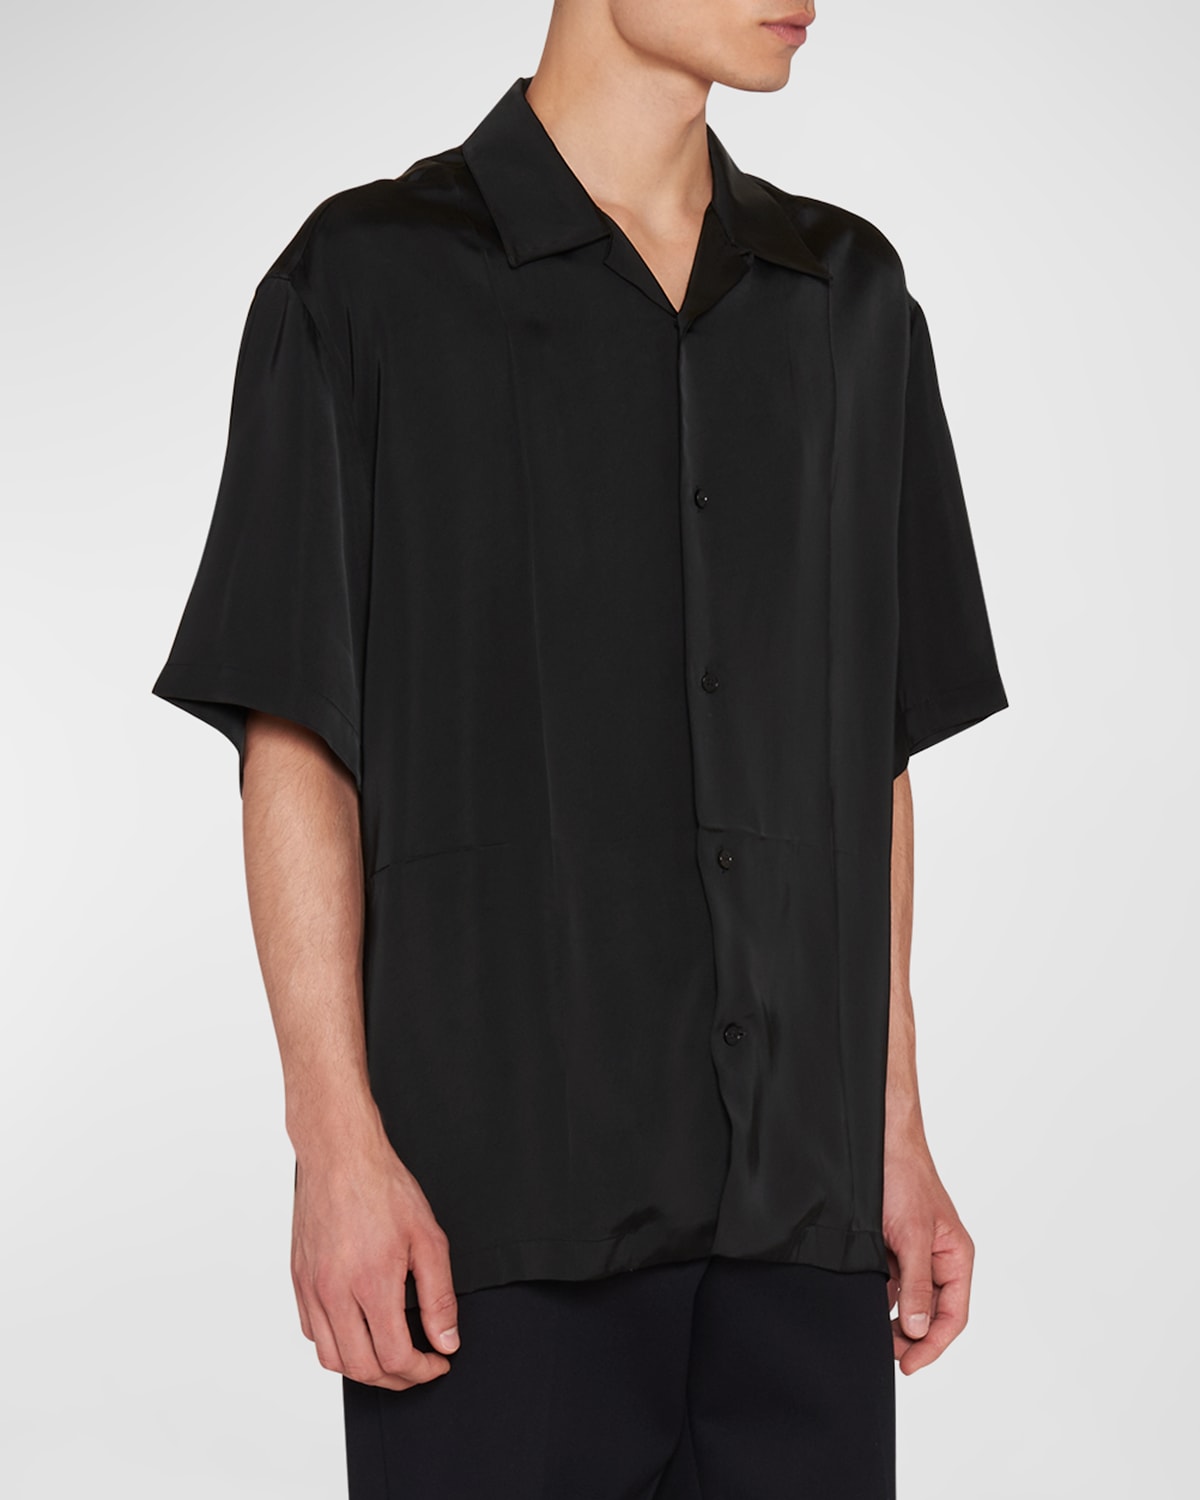 Men's Solid Pleated Sport Shirt